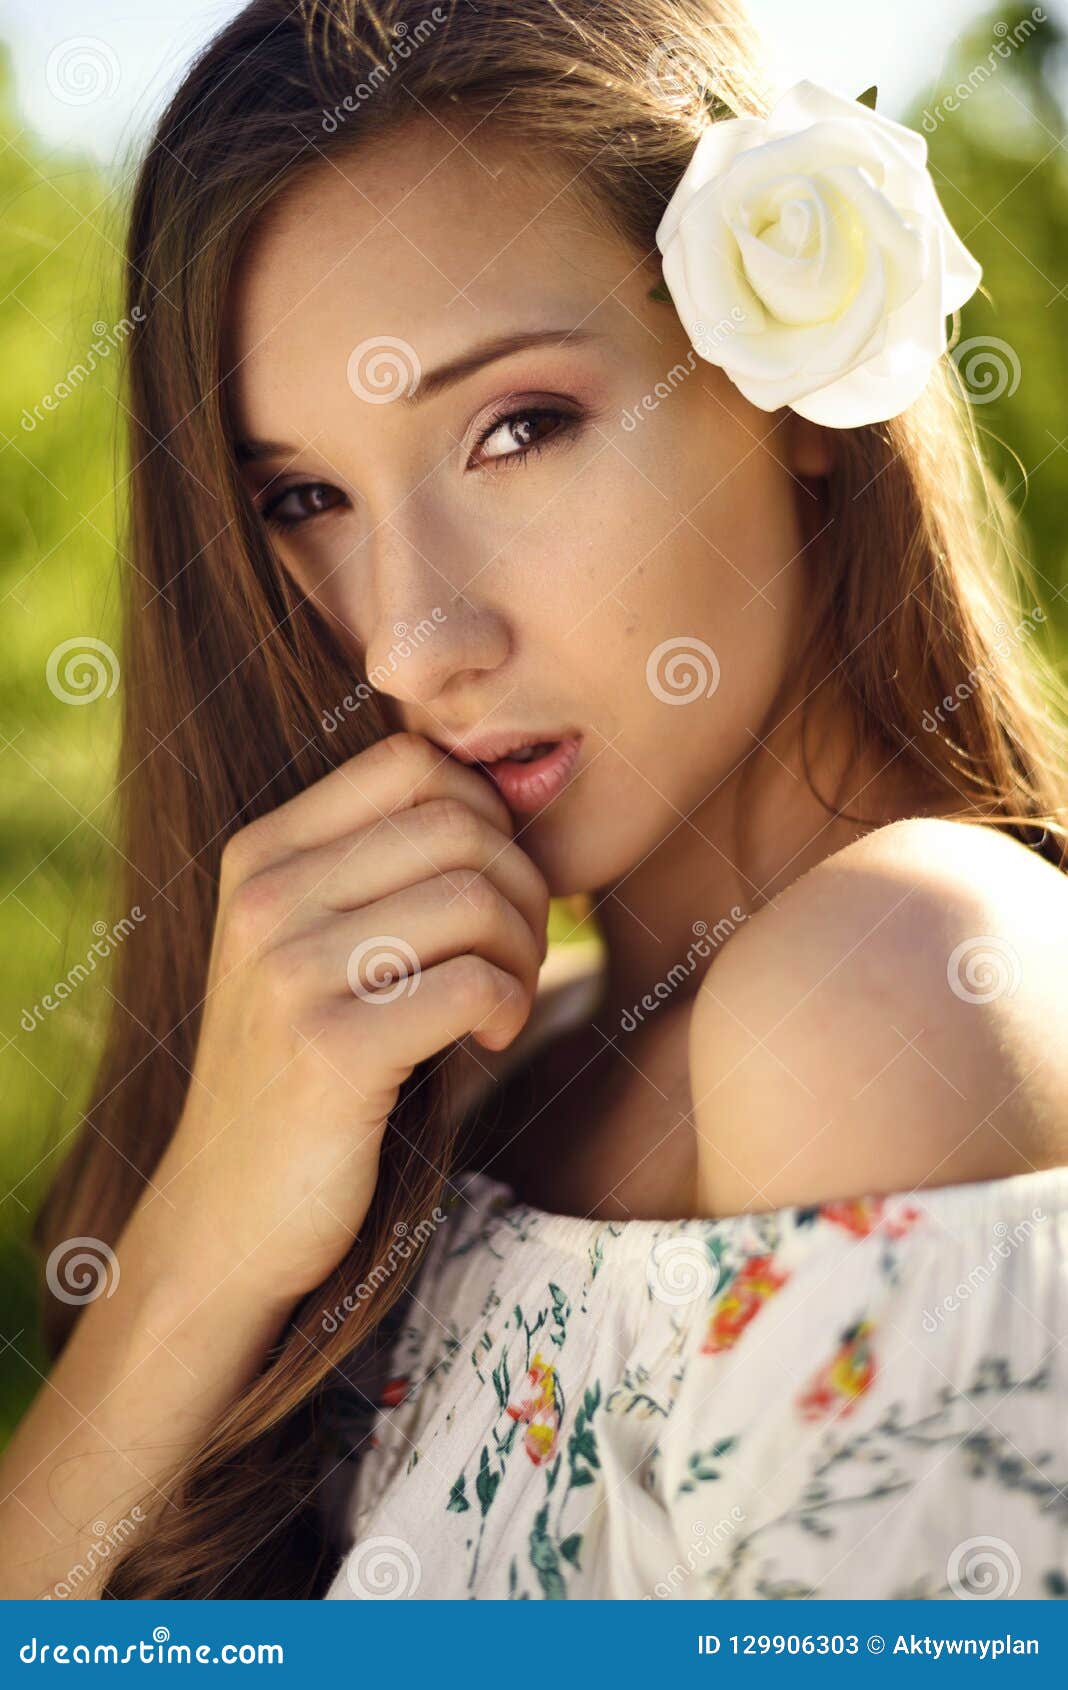 Beautiful Model with White Rose As Hair Accessory Posing in a Park Touching  Her Lips. Stock Image - Image of attractive, garden: 129906303